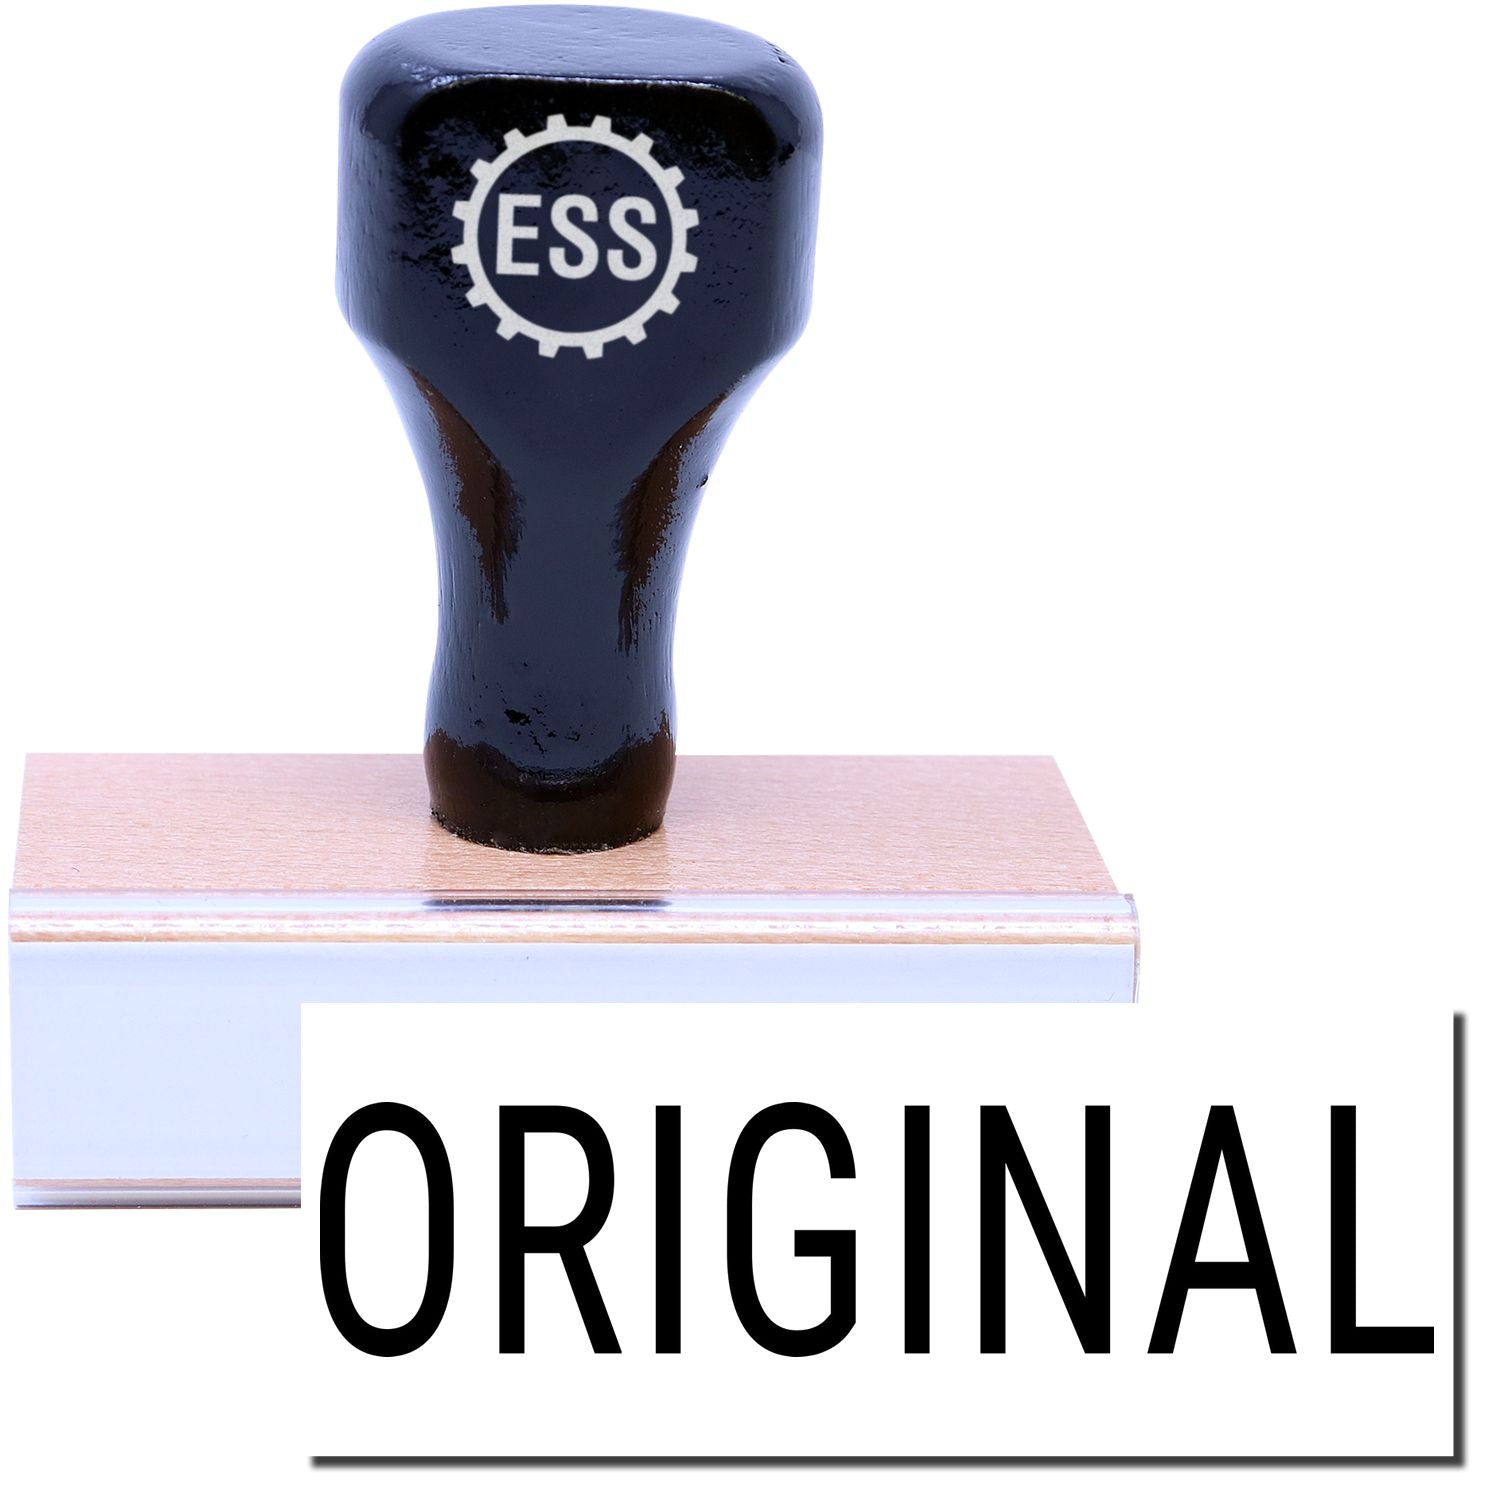 A stock office rubber stamp with a stamped image showing how the text "ORIGINAL" in a narrow font is displayed after stamping.